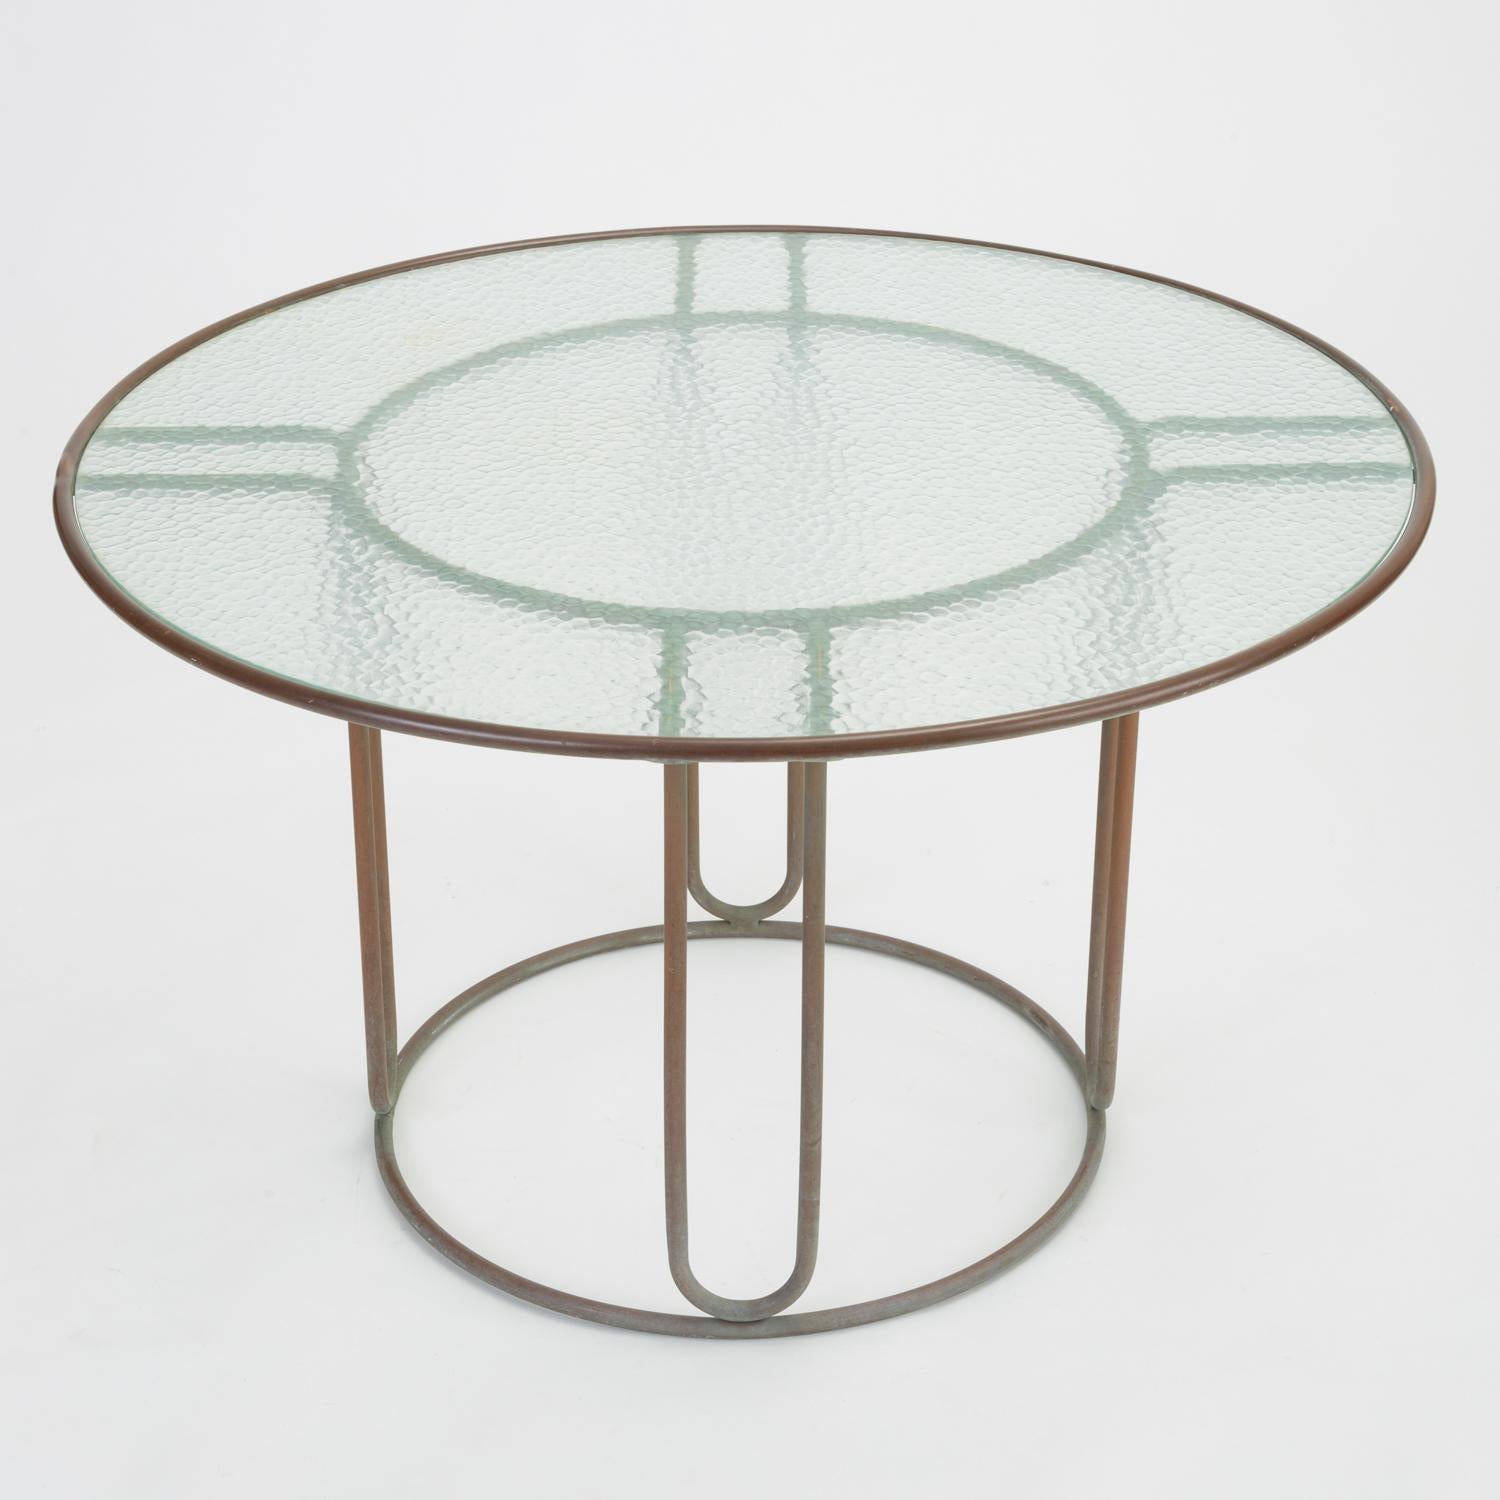 A patio dining table in patinated bronze designed by Walter Lamb and produced by Brown Jordan. The round frame is described by two concentric rings of bronze with radial supports and a circular bronze base. The round tabletop is a single piece of